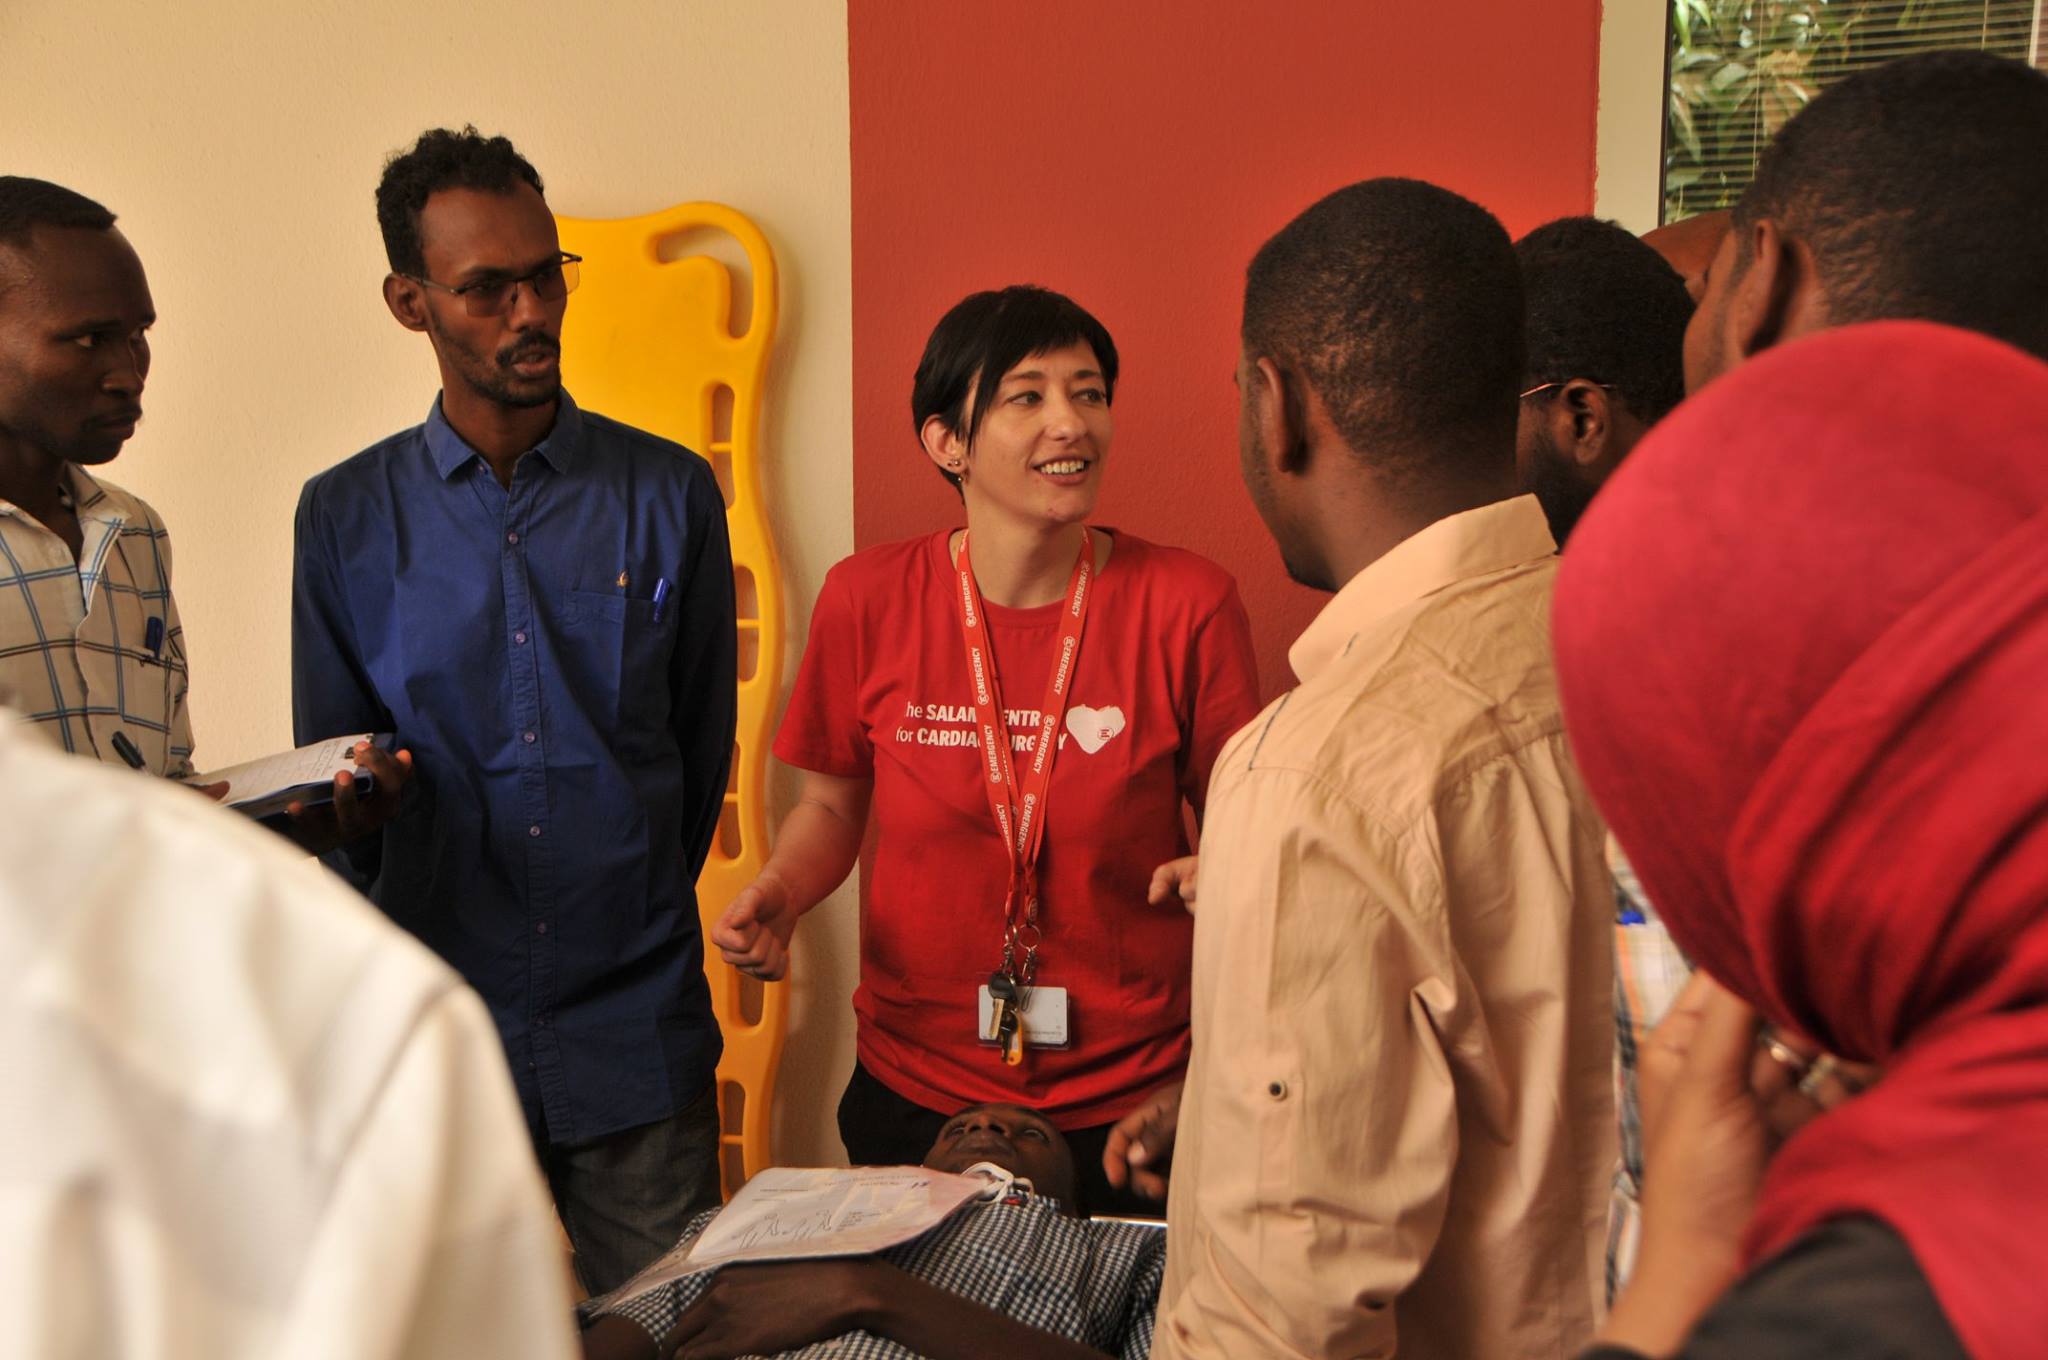 Trainees receive instruction from EMERGENCY staff